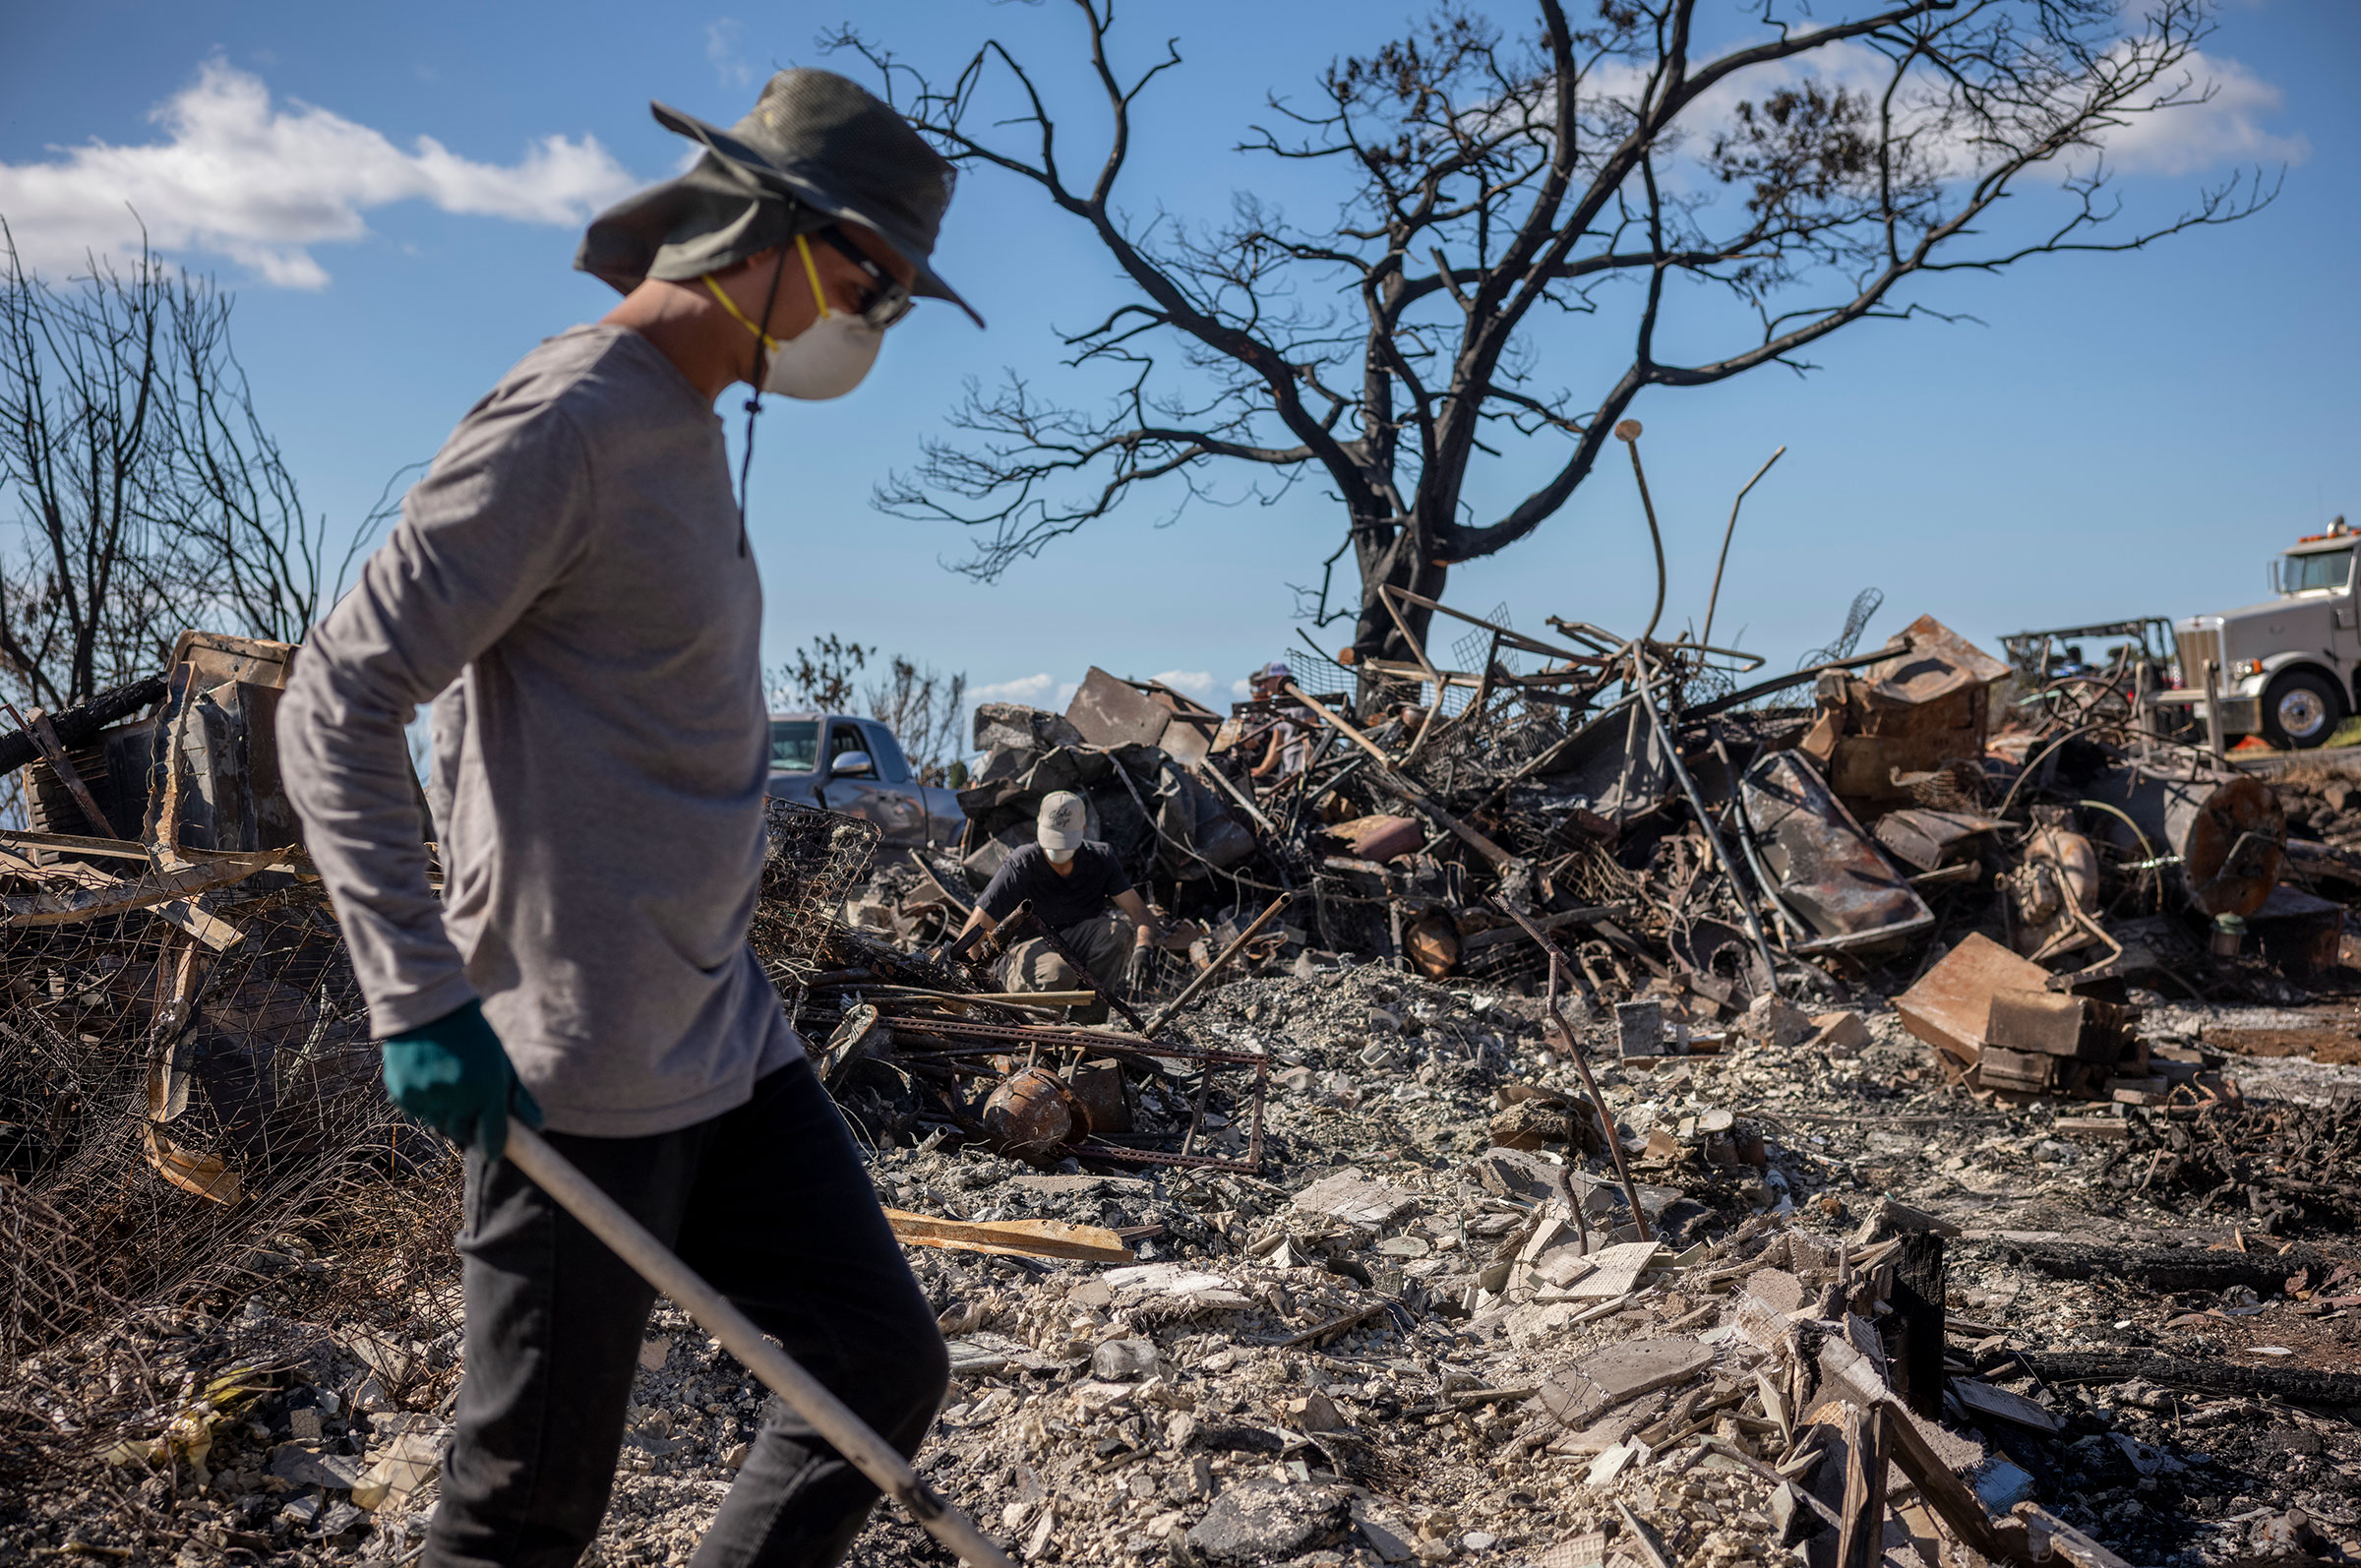 Spencer Kim helps clear debris at the ruins of a house that was burned down